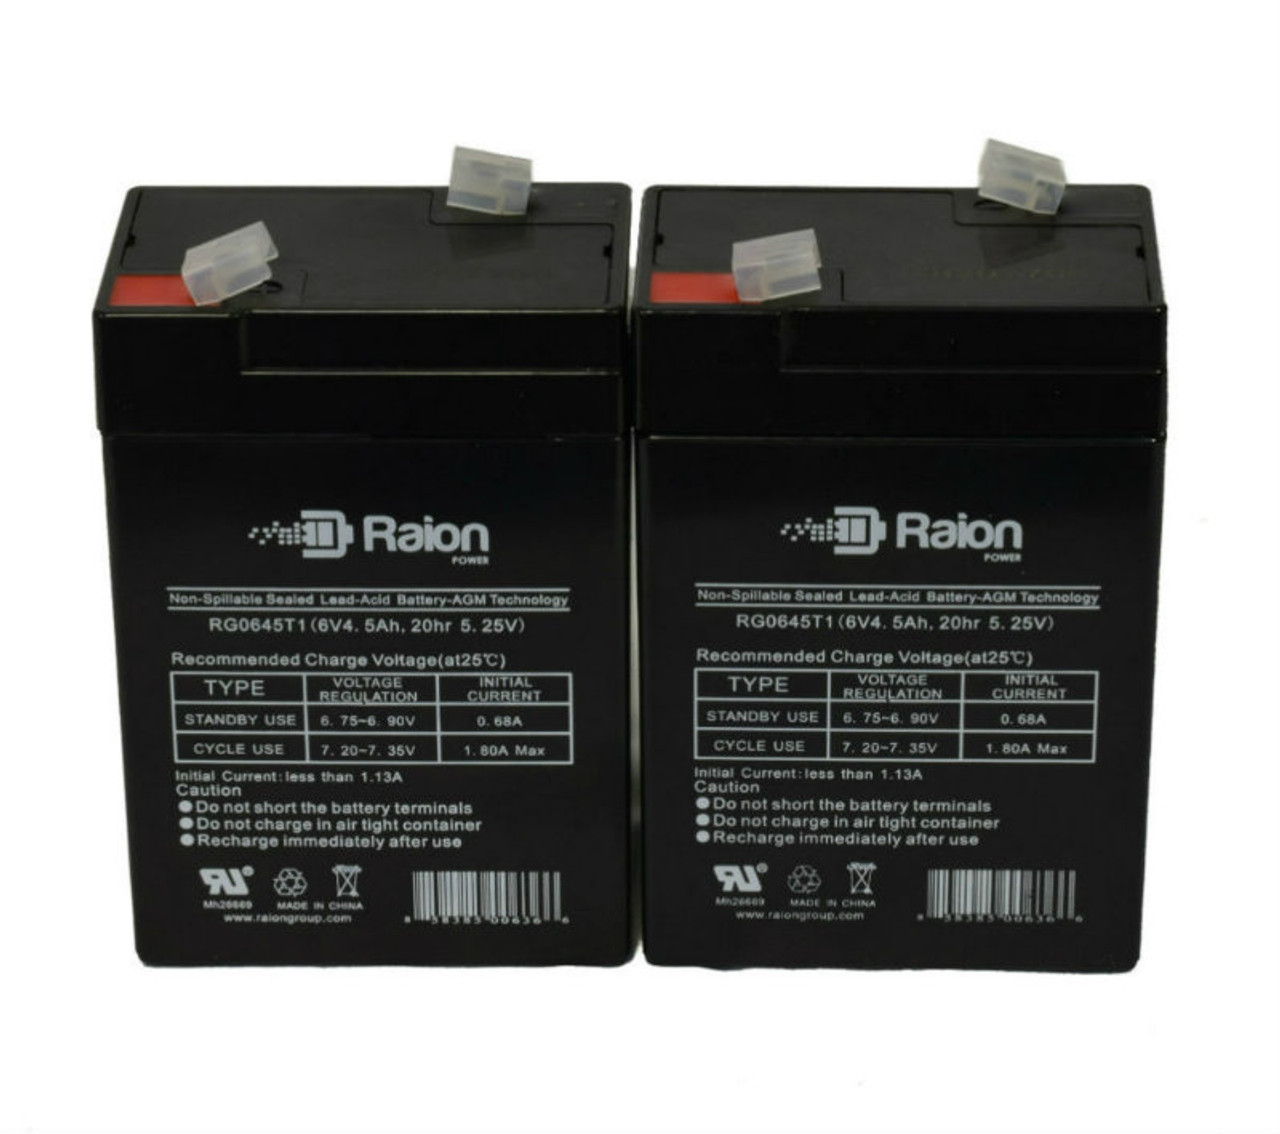 Raion Power 6V 4.5Ah Replacement Emergency Light Battery for Chloride ERS3 - 2 Pack